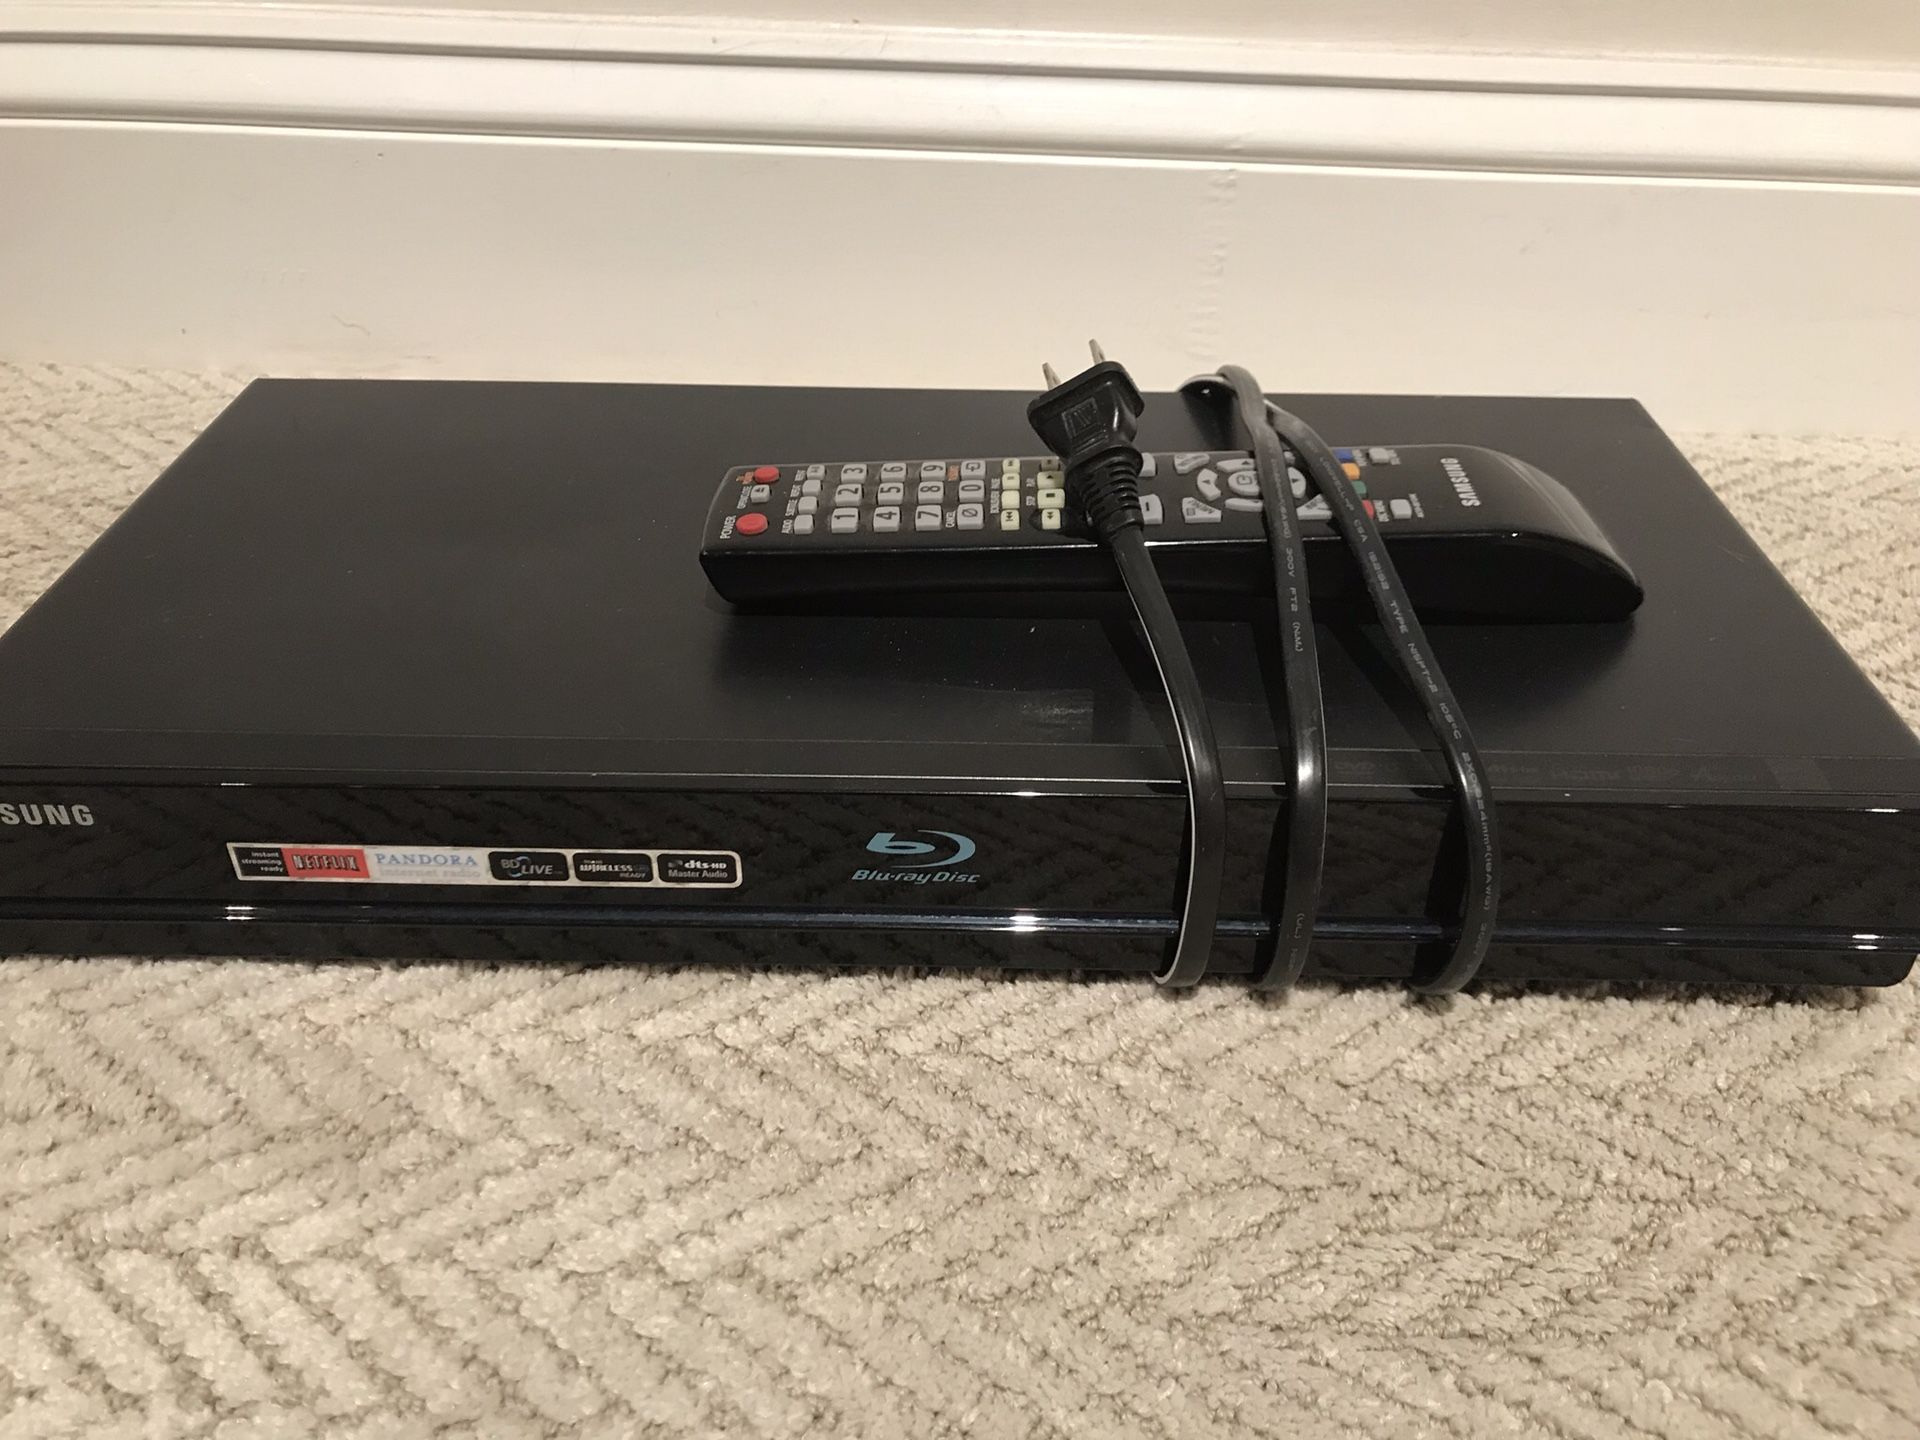 Samsung Dvd Blu-ray player with Netflix and remote